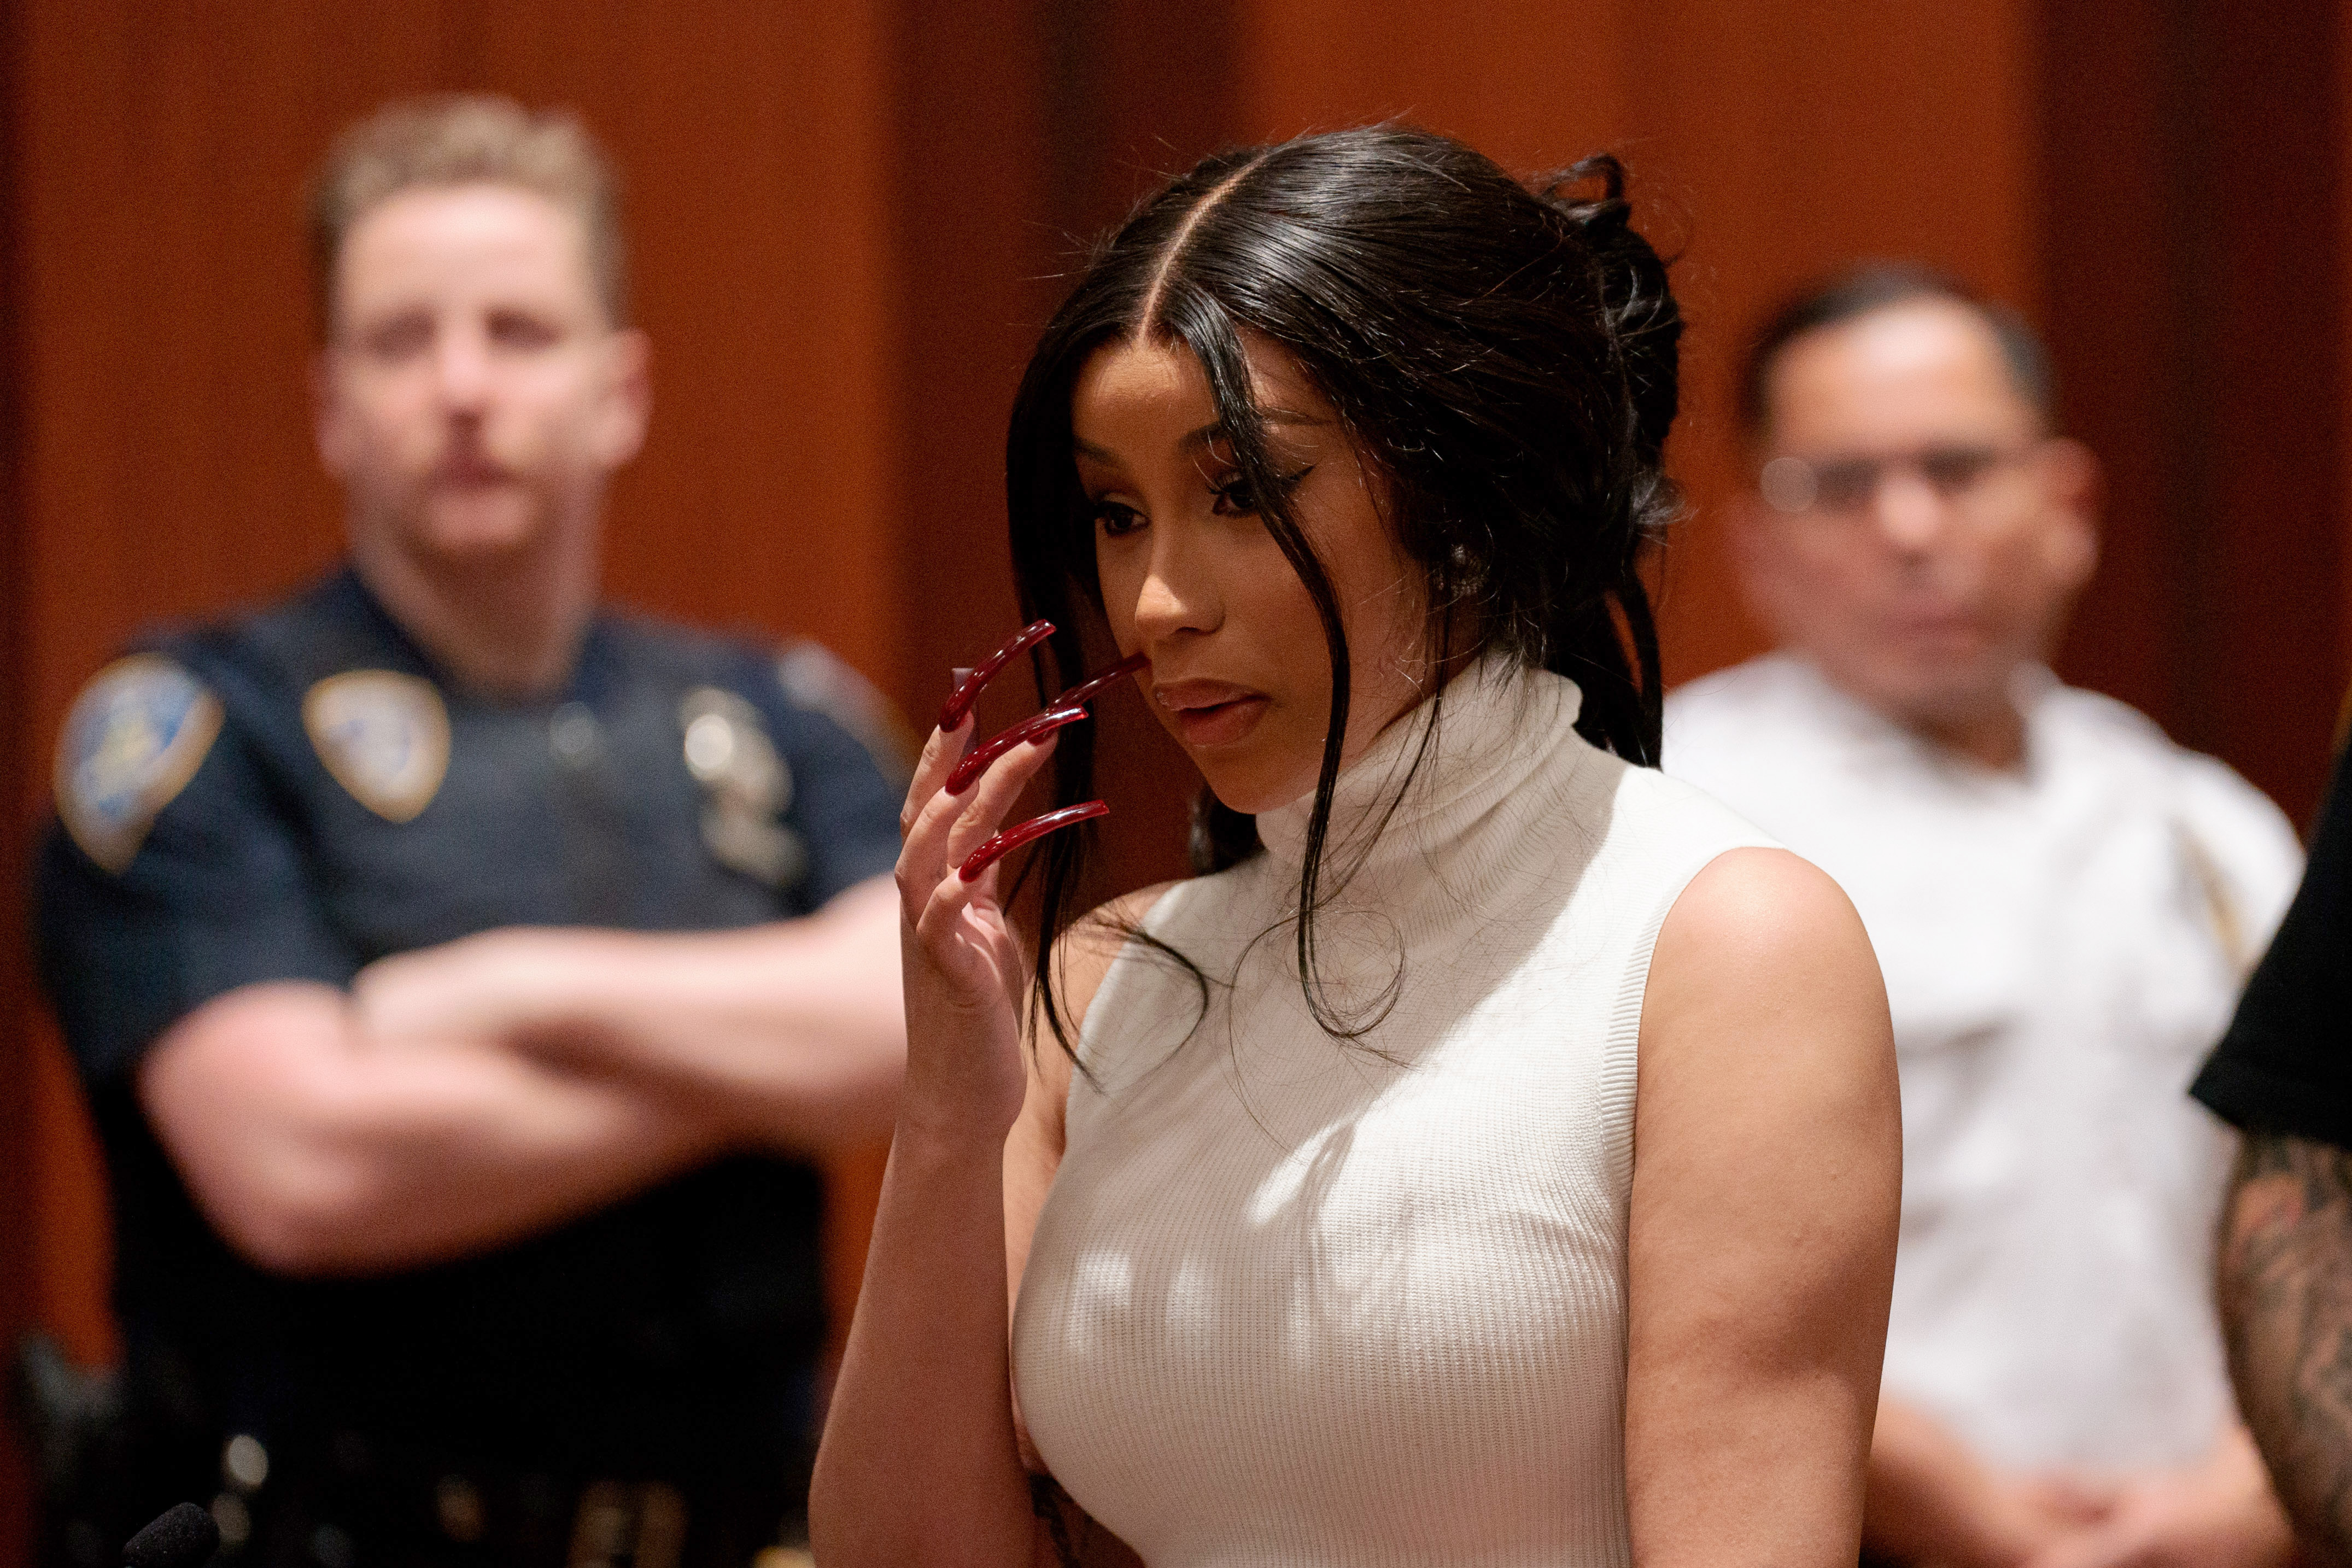 Cardi B Appears In Queens Court After Misdemeanor Guilty Plea In September,This Week in Photos